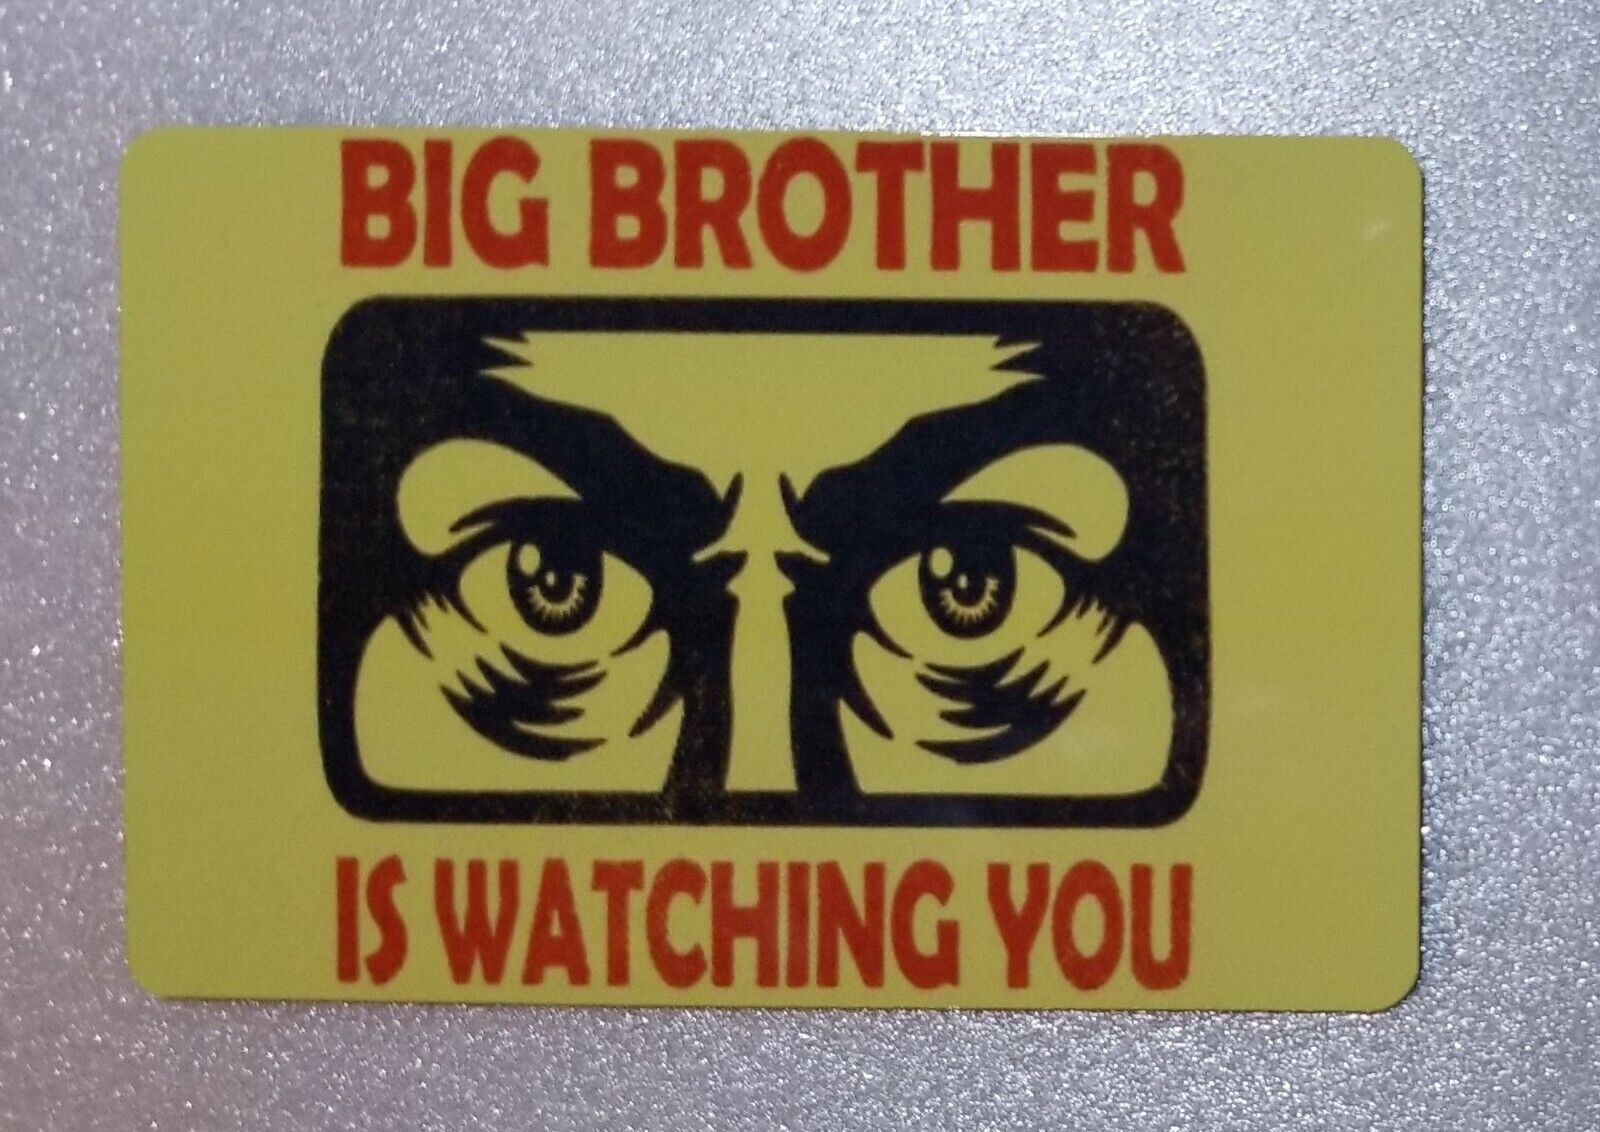 1984 Big Brother Is Watching You George Orwell 2x3 refrigerator fridge magnet